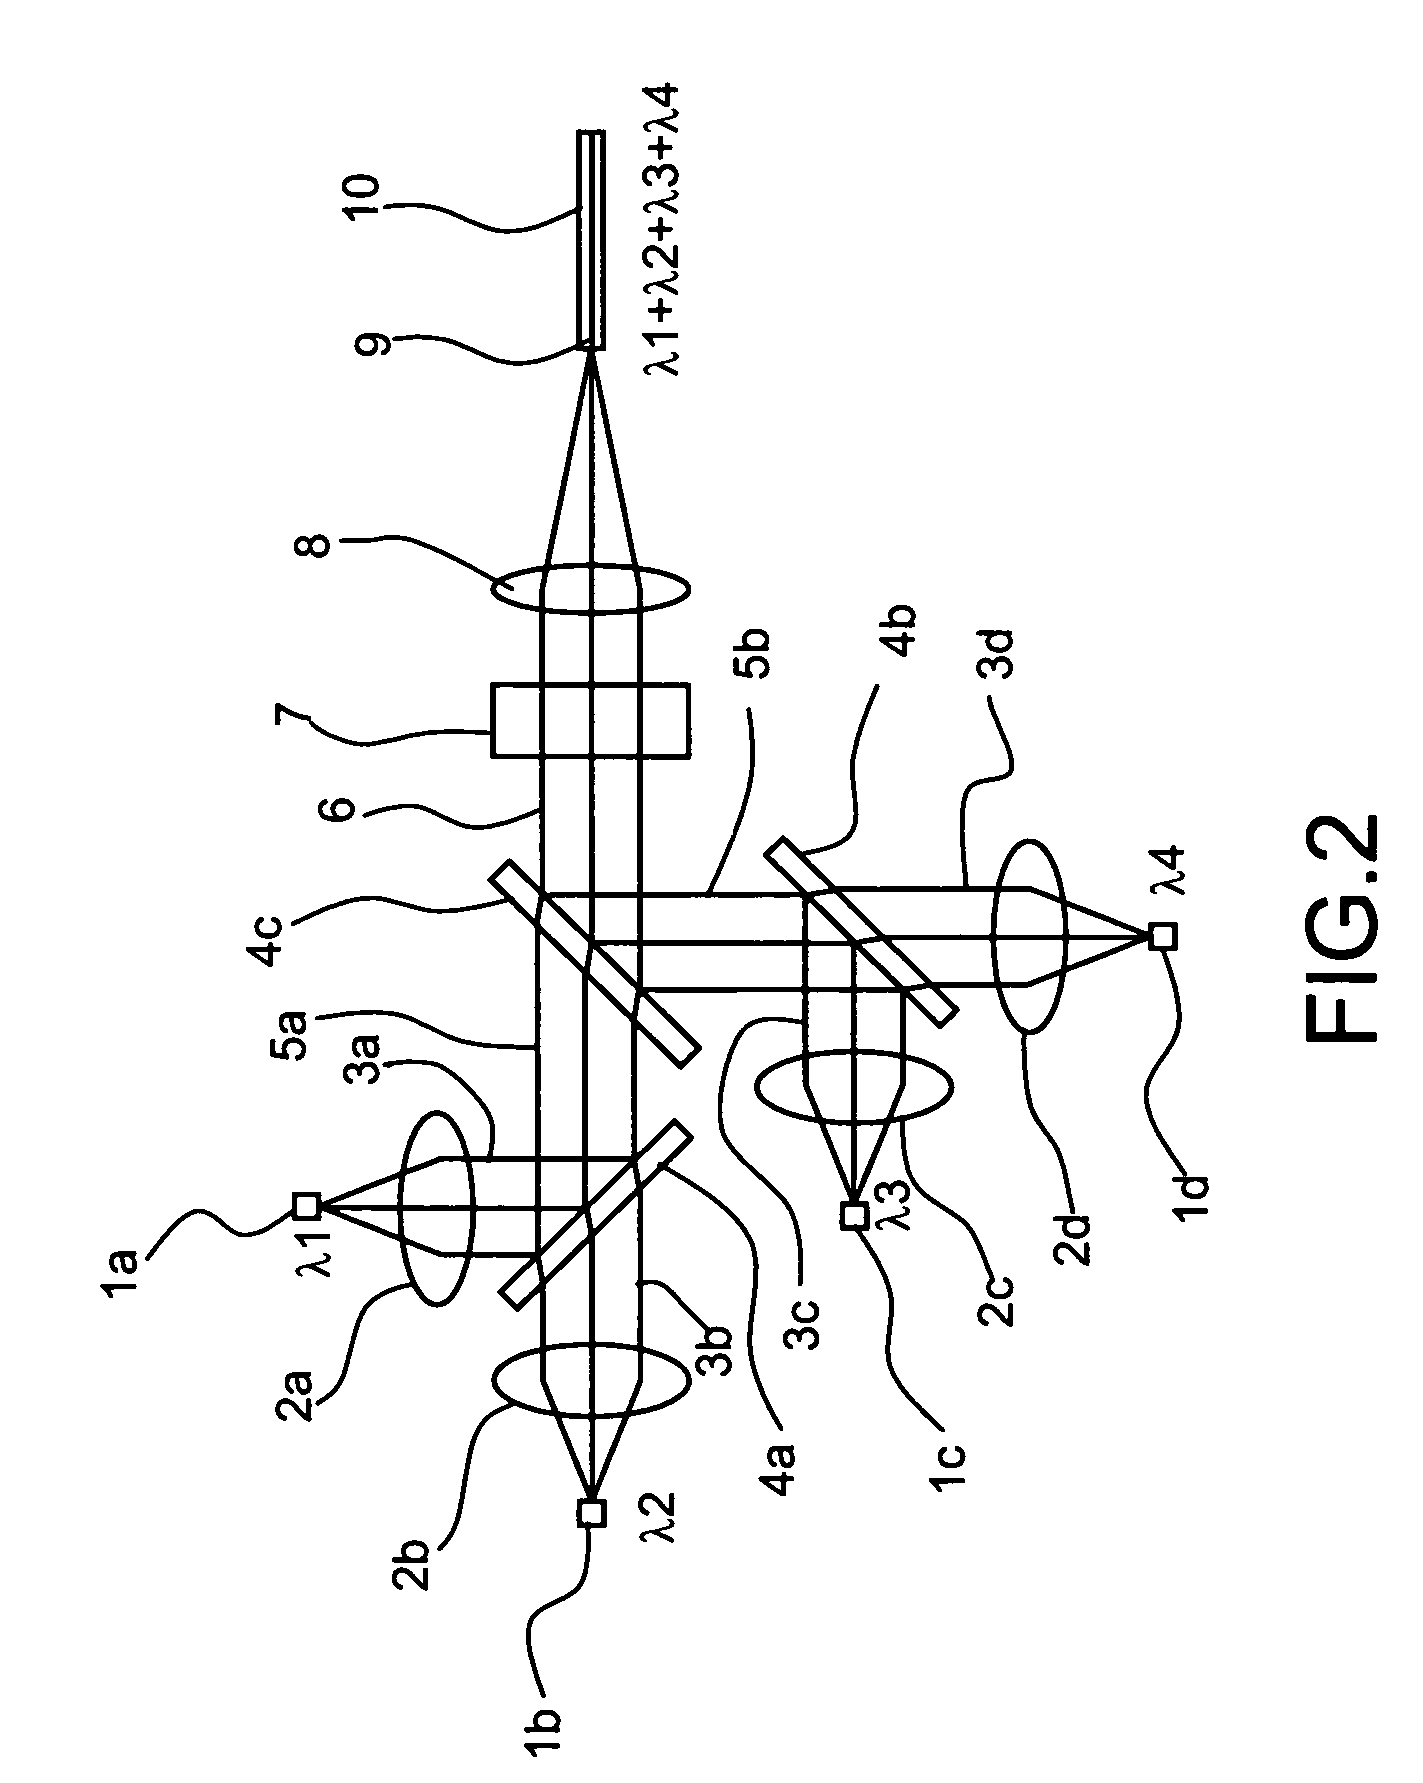 Multi-wavelength transmitter optical sub assembly with integrated multiplexer